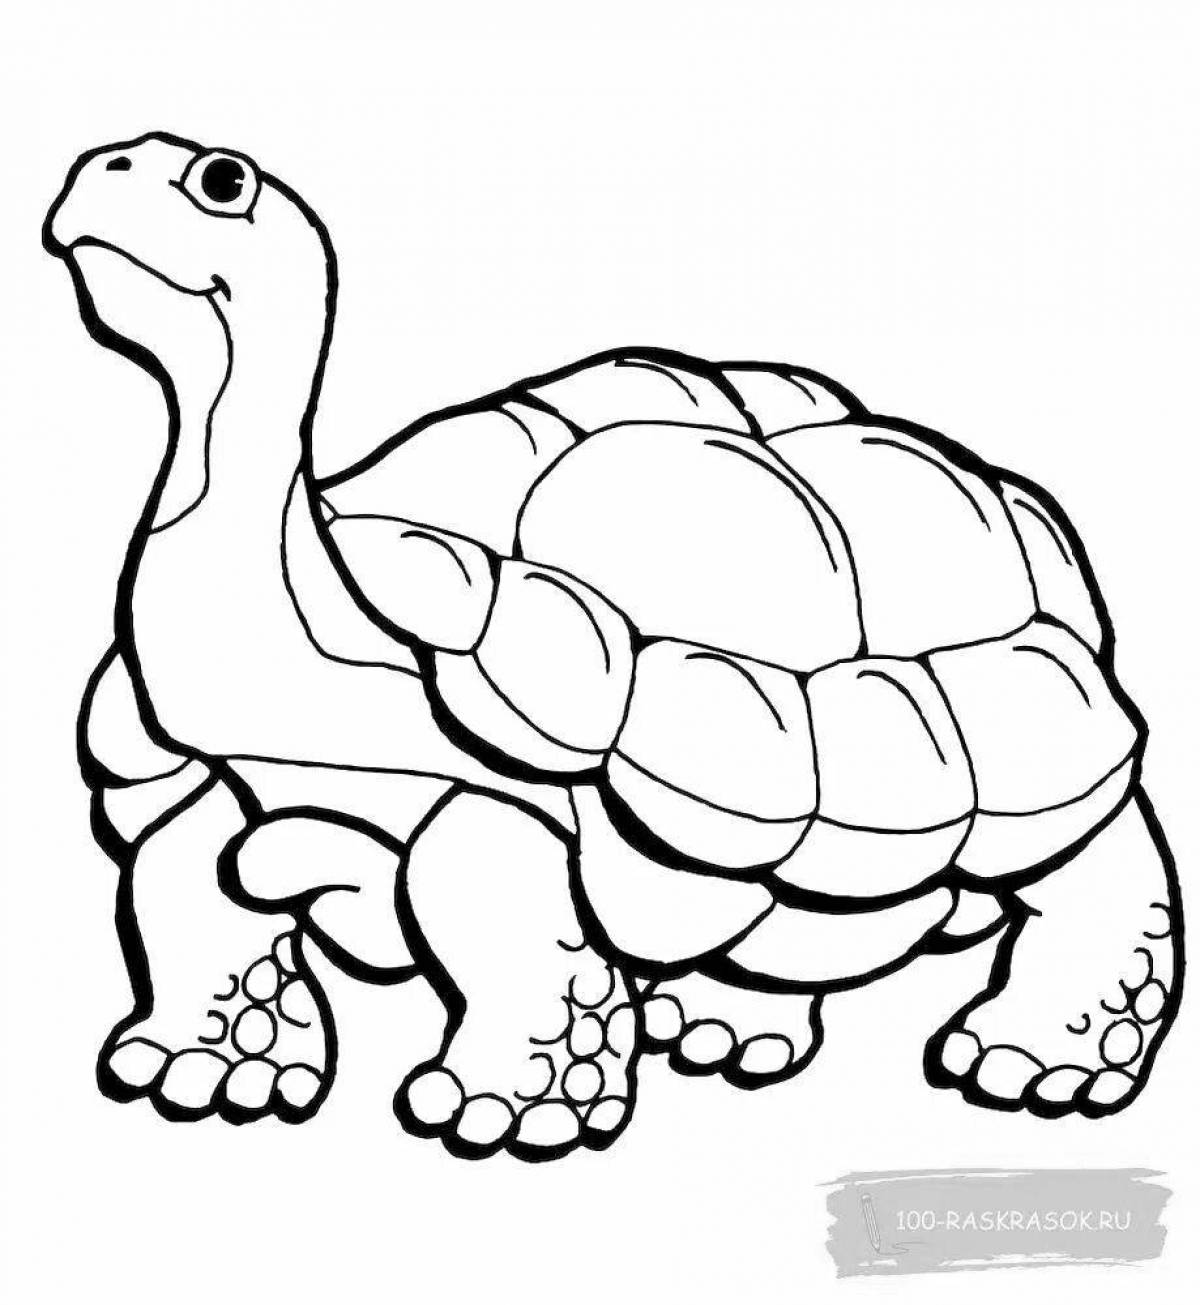 Coloring turtle with color splashes for kids